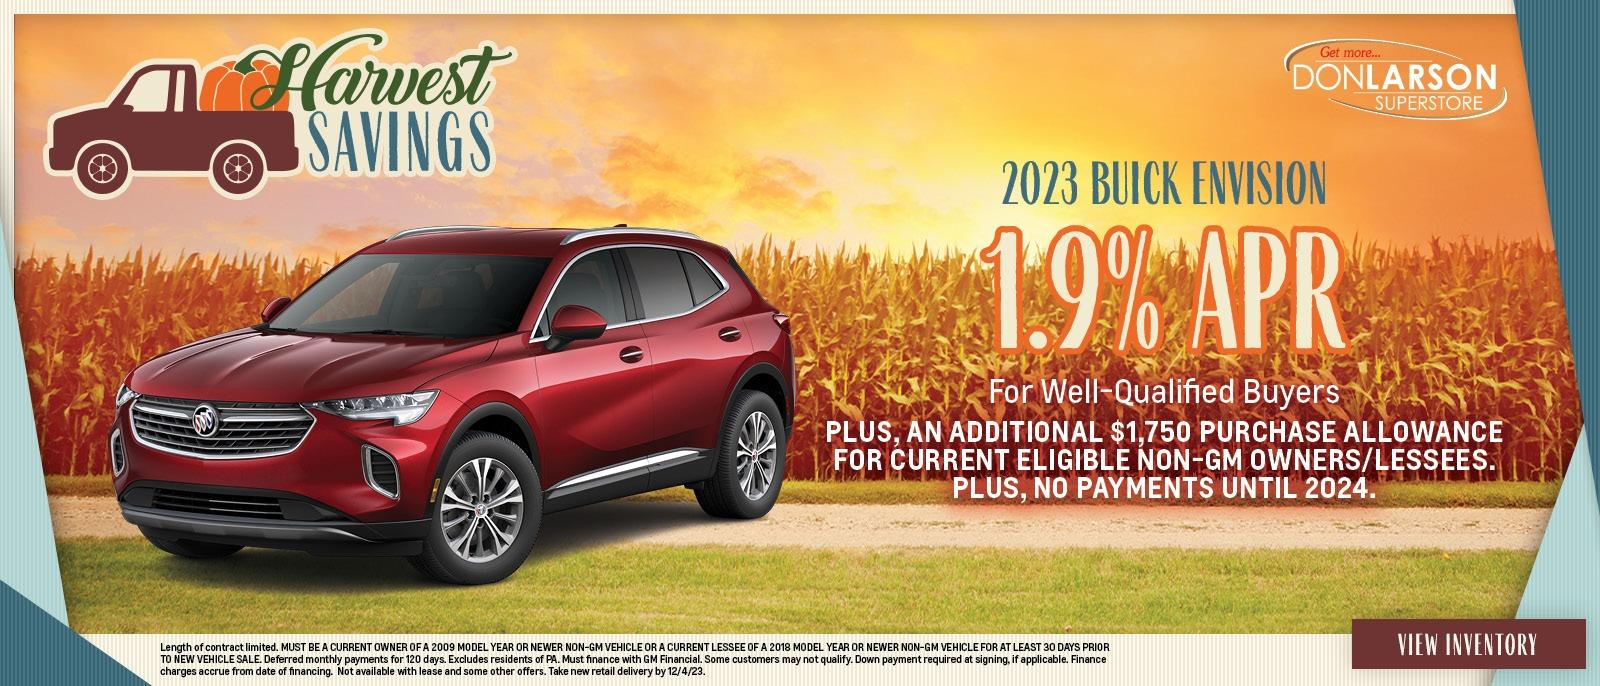 2023 Buick Envision | Don Larson Superstore | Baraboo, WI